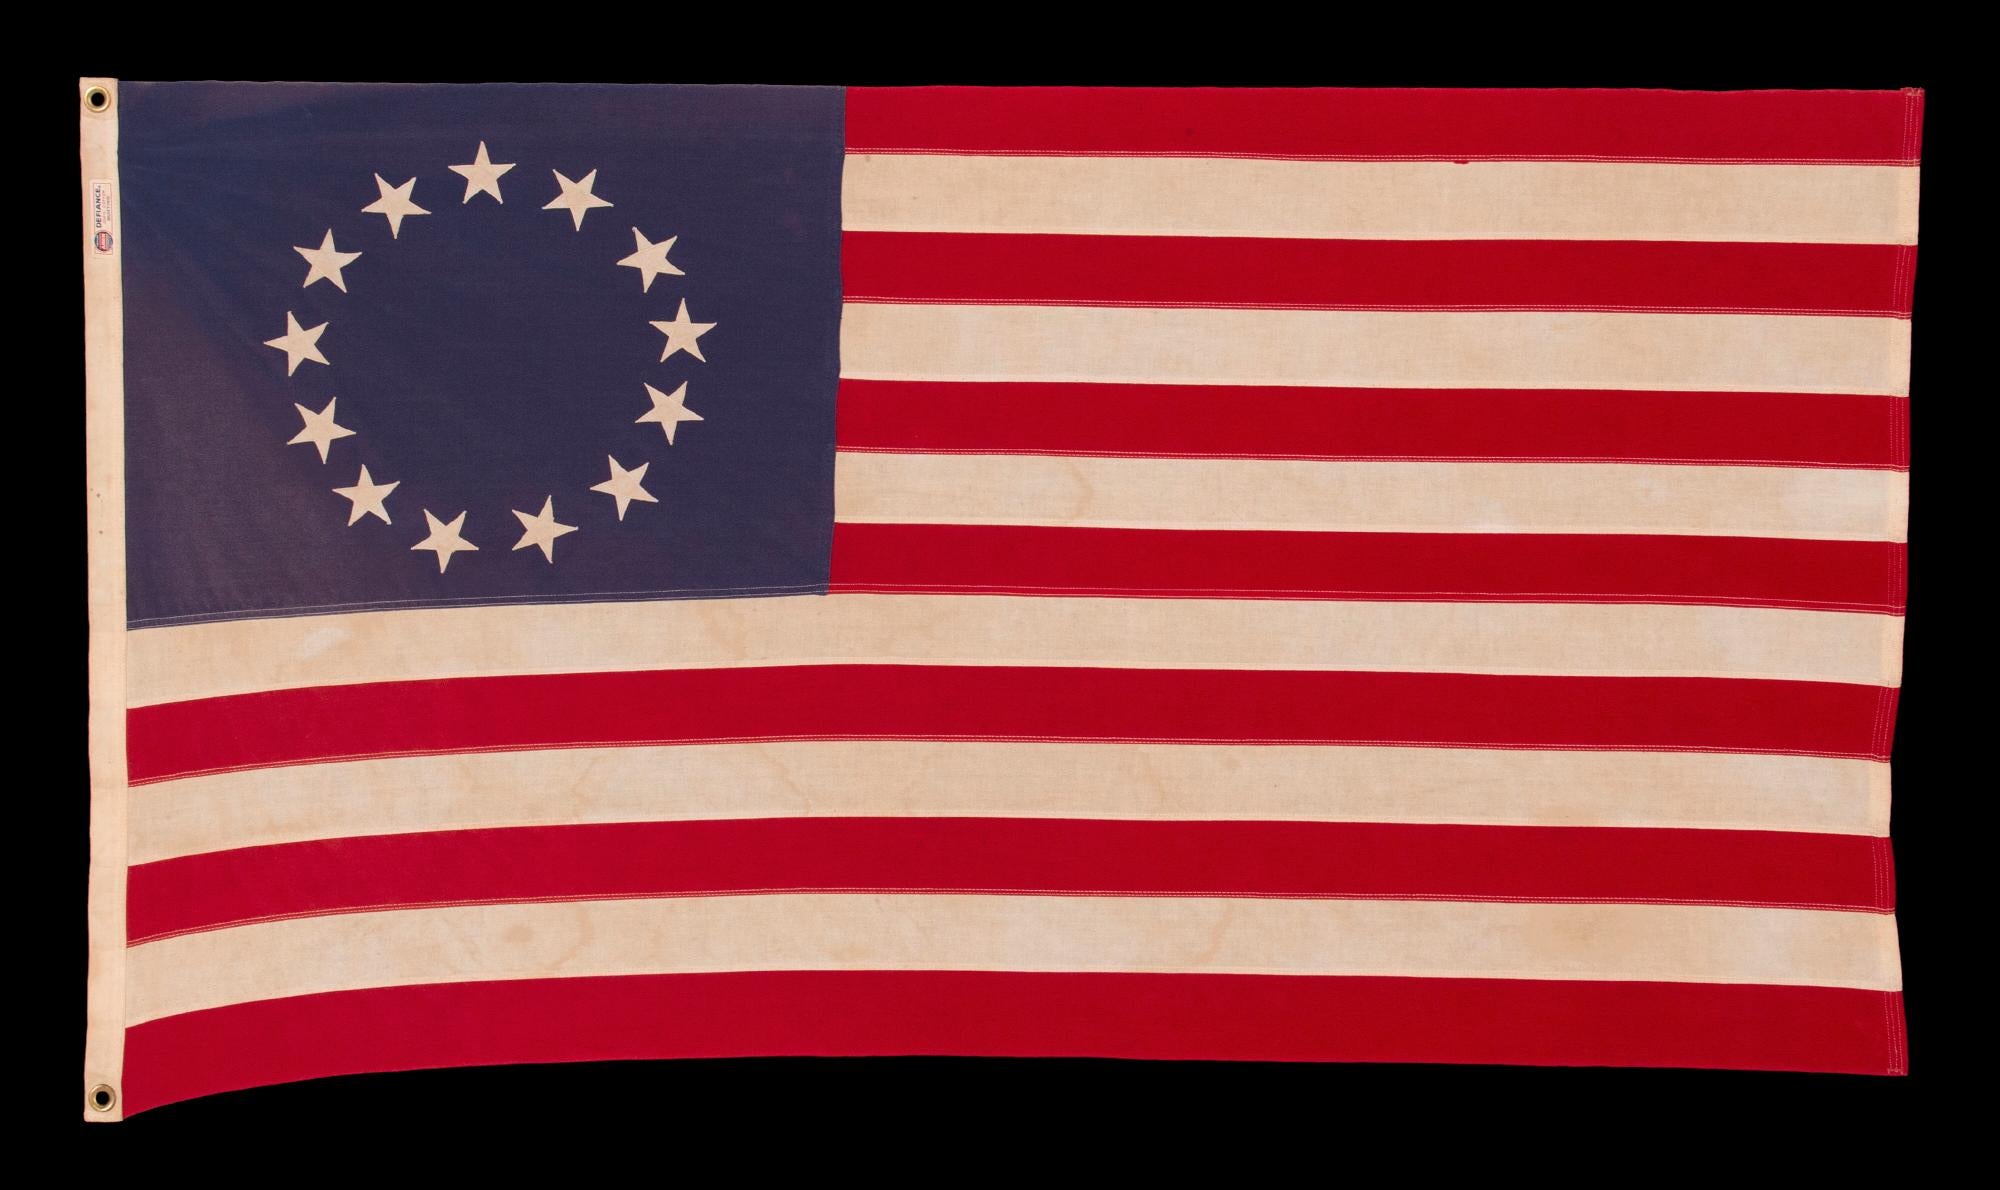 13 STARS IN THE BETSY ROSS PATTERN, ON A VINTAGE AMERICAN FLAG, MADE BY THE ANNIN COMPANY OF NEW YORK & NEW JERSEY, circa 1955 - 1965

13 star American national flag, made entirely of cotton by the Annin Company of New York & New Jersey, in the